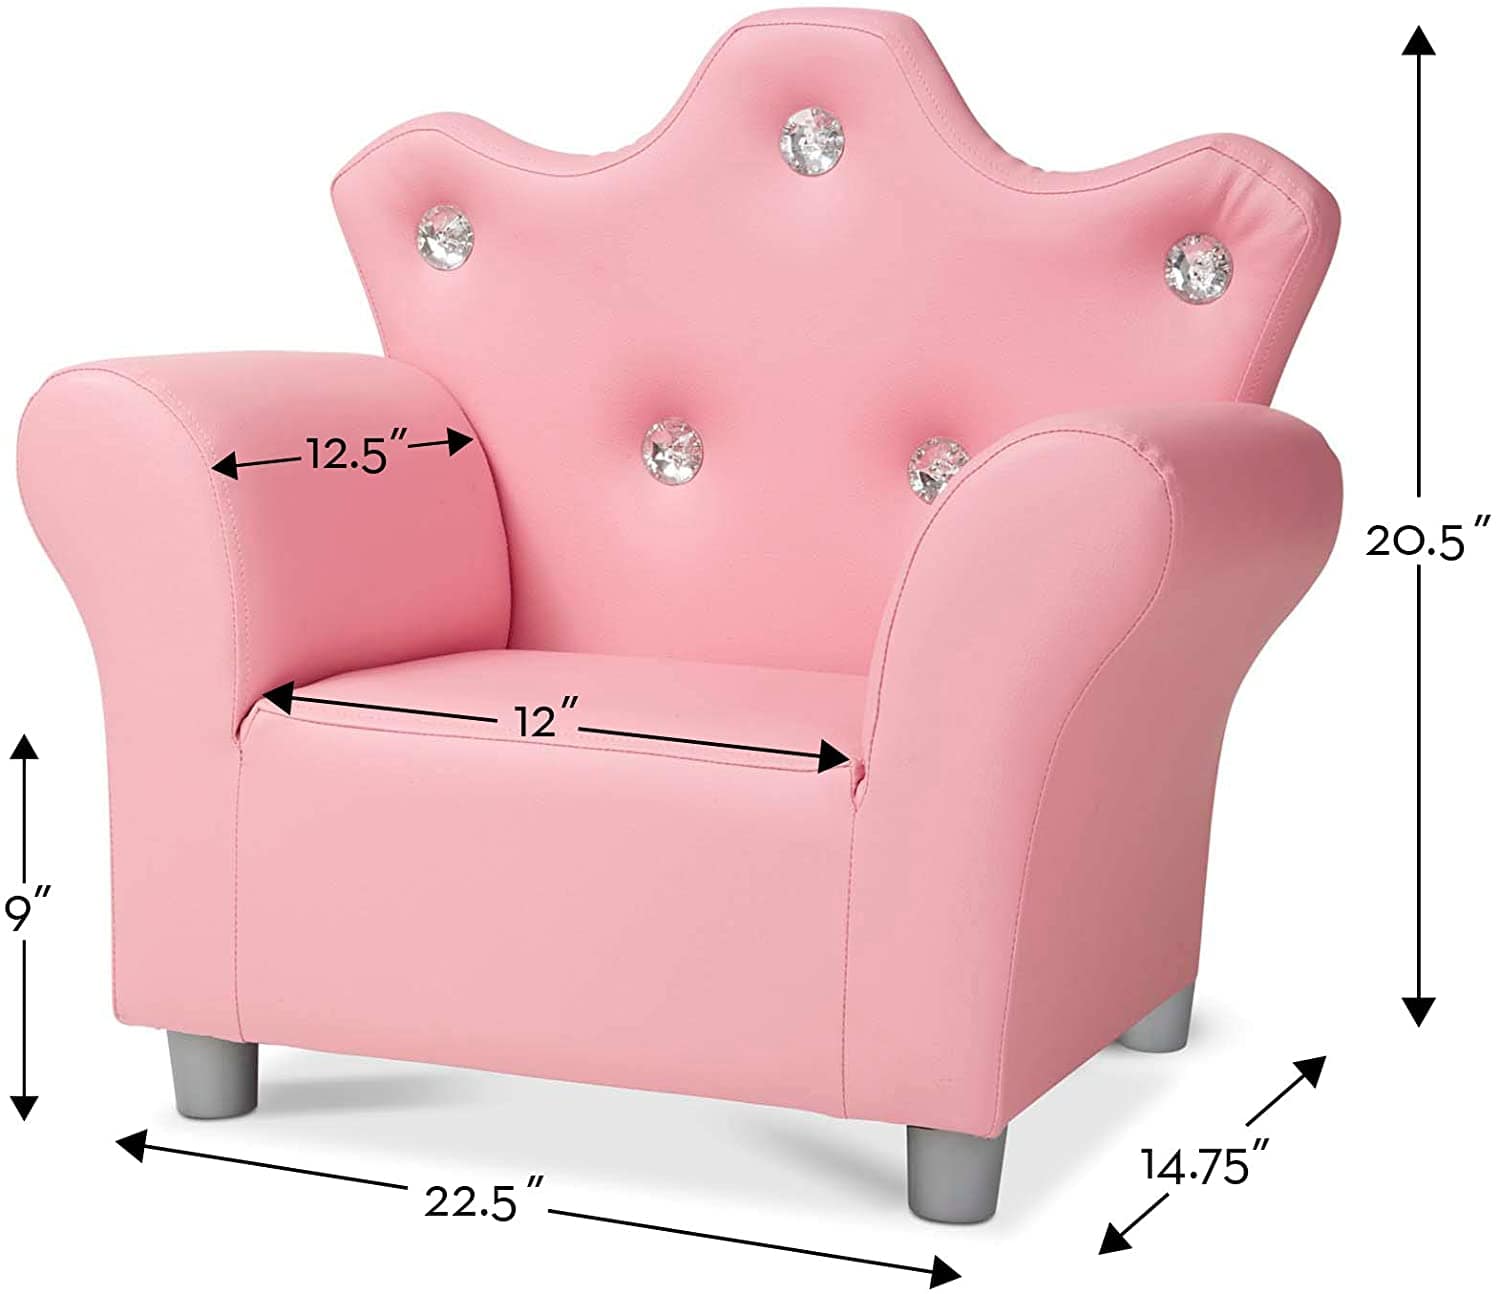 Pink Faux Leather Child’s Crown-Back Armchair (Kid’s Furniture)